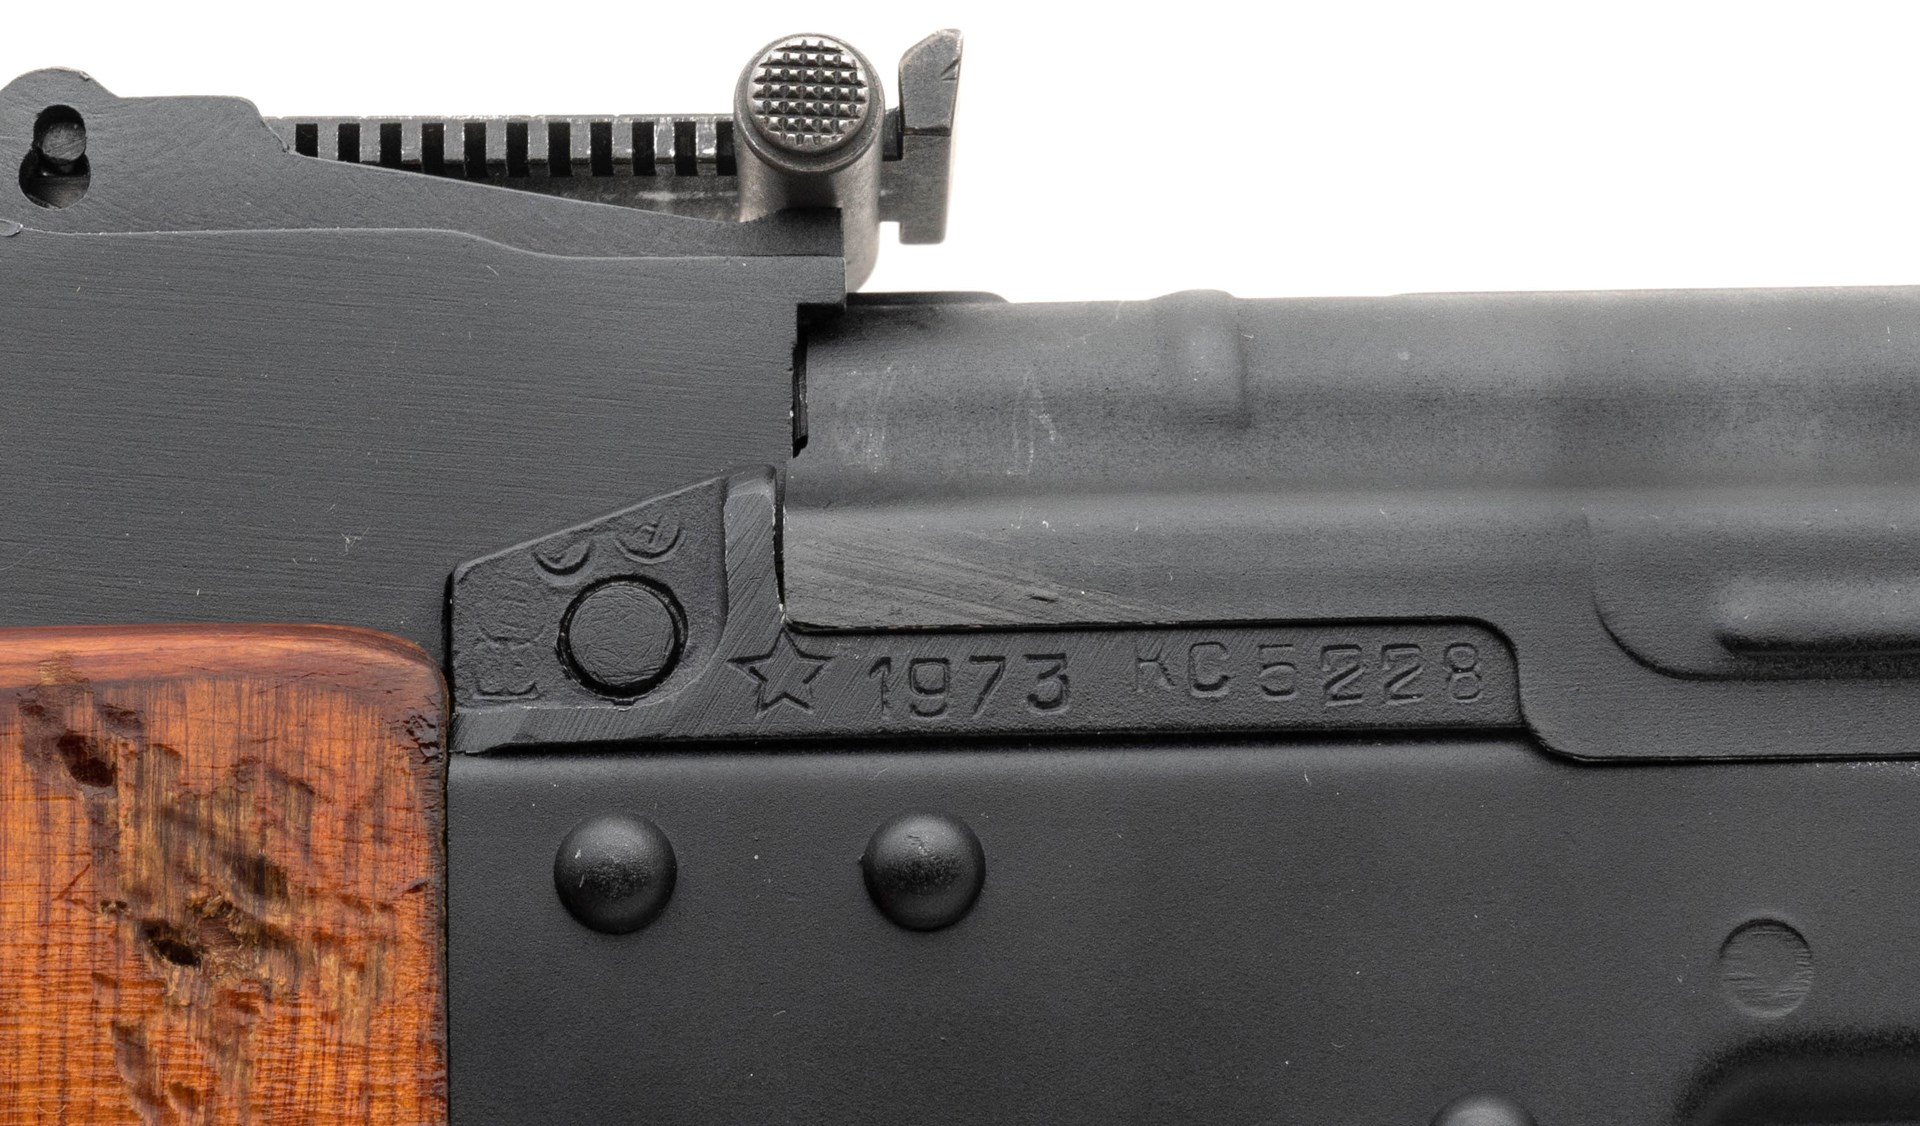 Left side close-up of the front trunnion markings on a 1973 Tula AKM semi-automatic parts kit built using a Childers receiver. Photograph by Jeff Hallinan of Collectors Firearms in Houston, Texas.